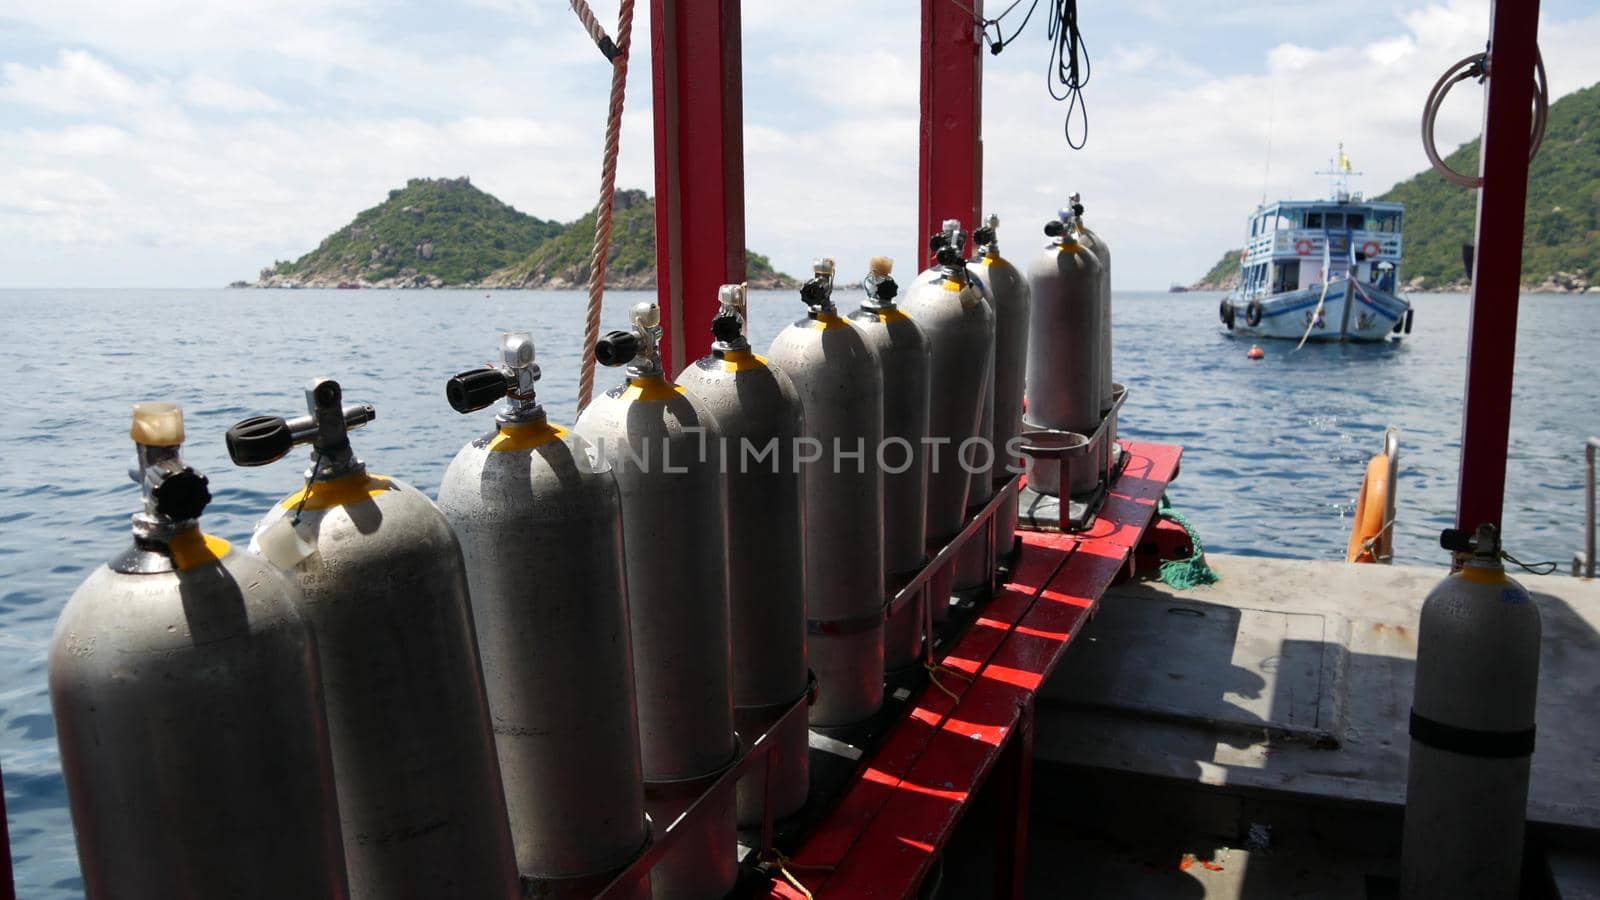 Row of oxygen tanks and diving equipment placed on modern boat in rippling ocean near Koh Tao resort, Thailand. Concept of tourist sports extreme entertainment, adventure and new experience